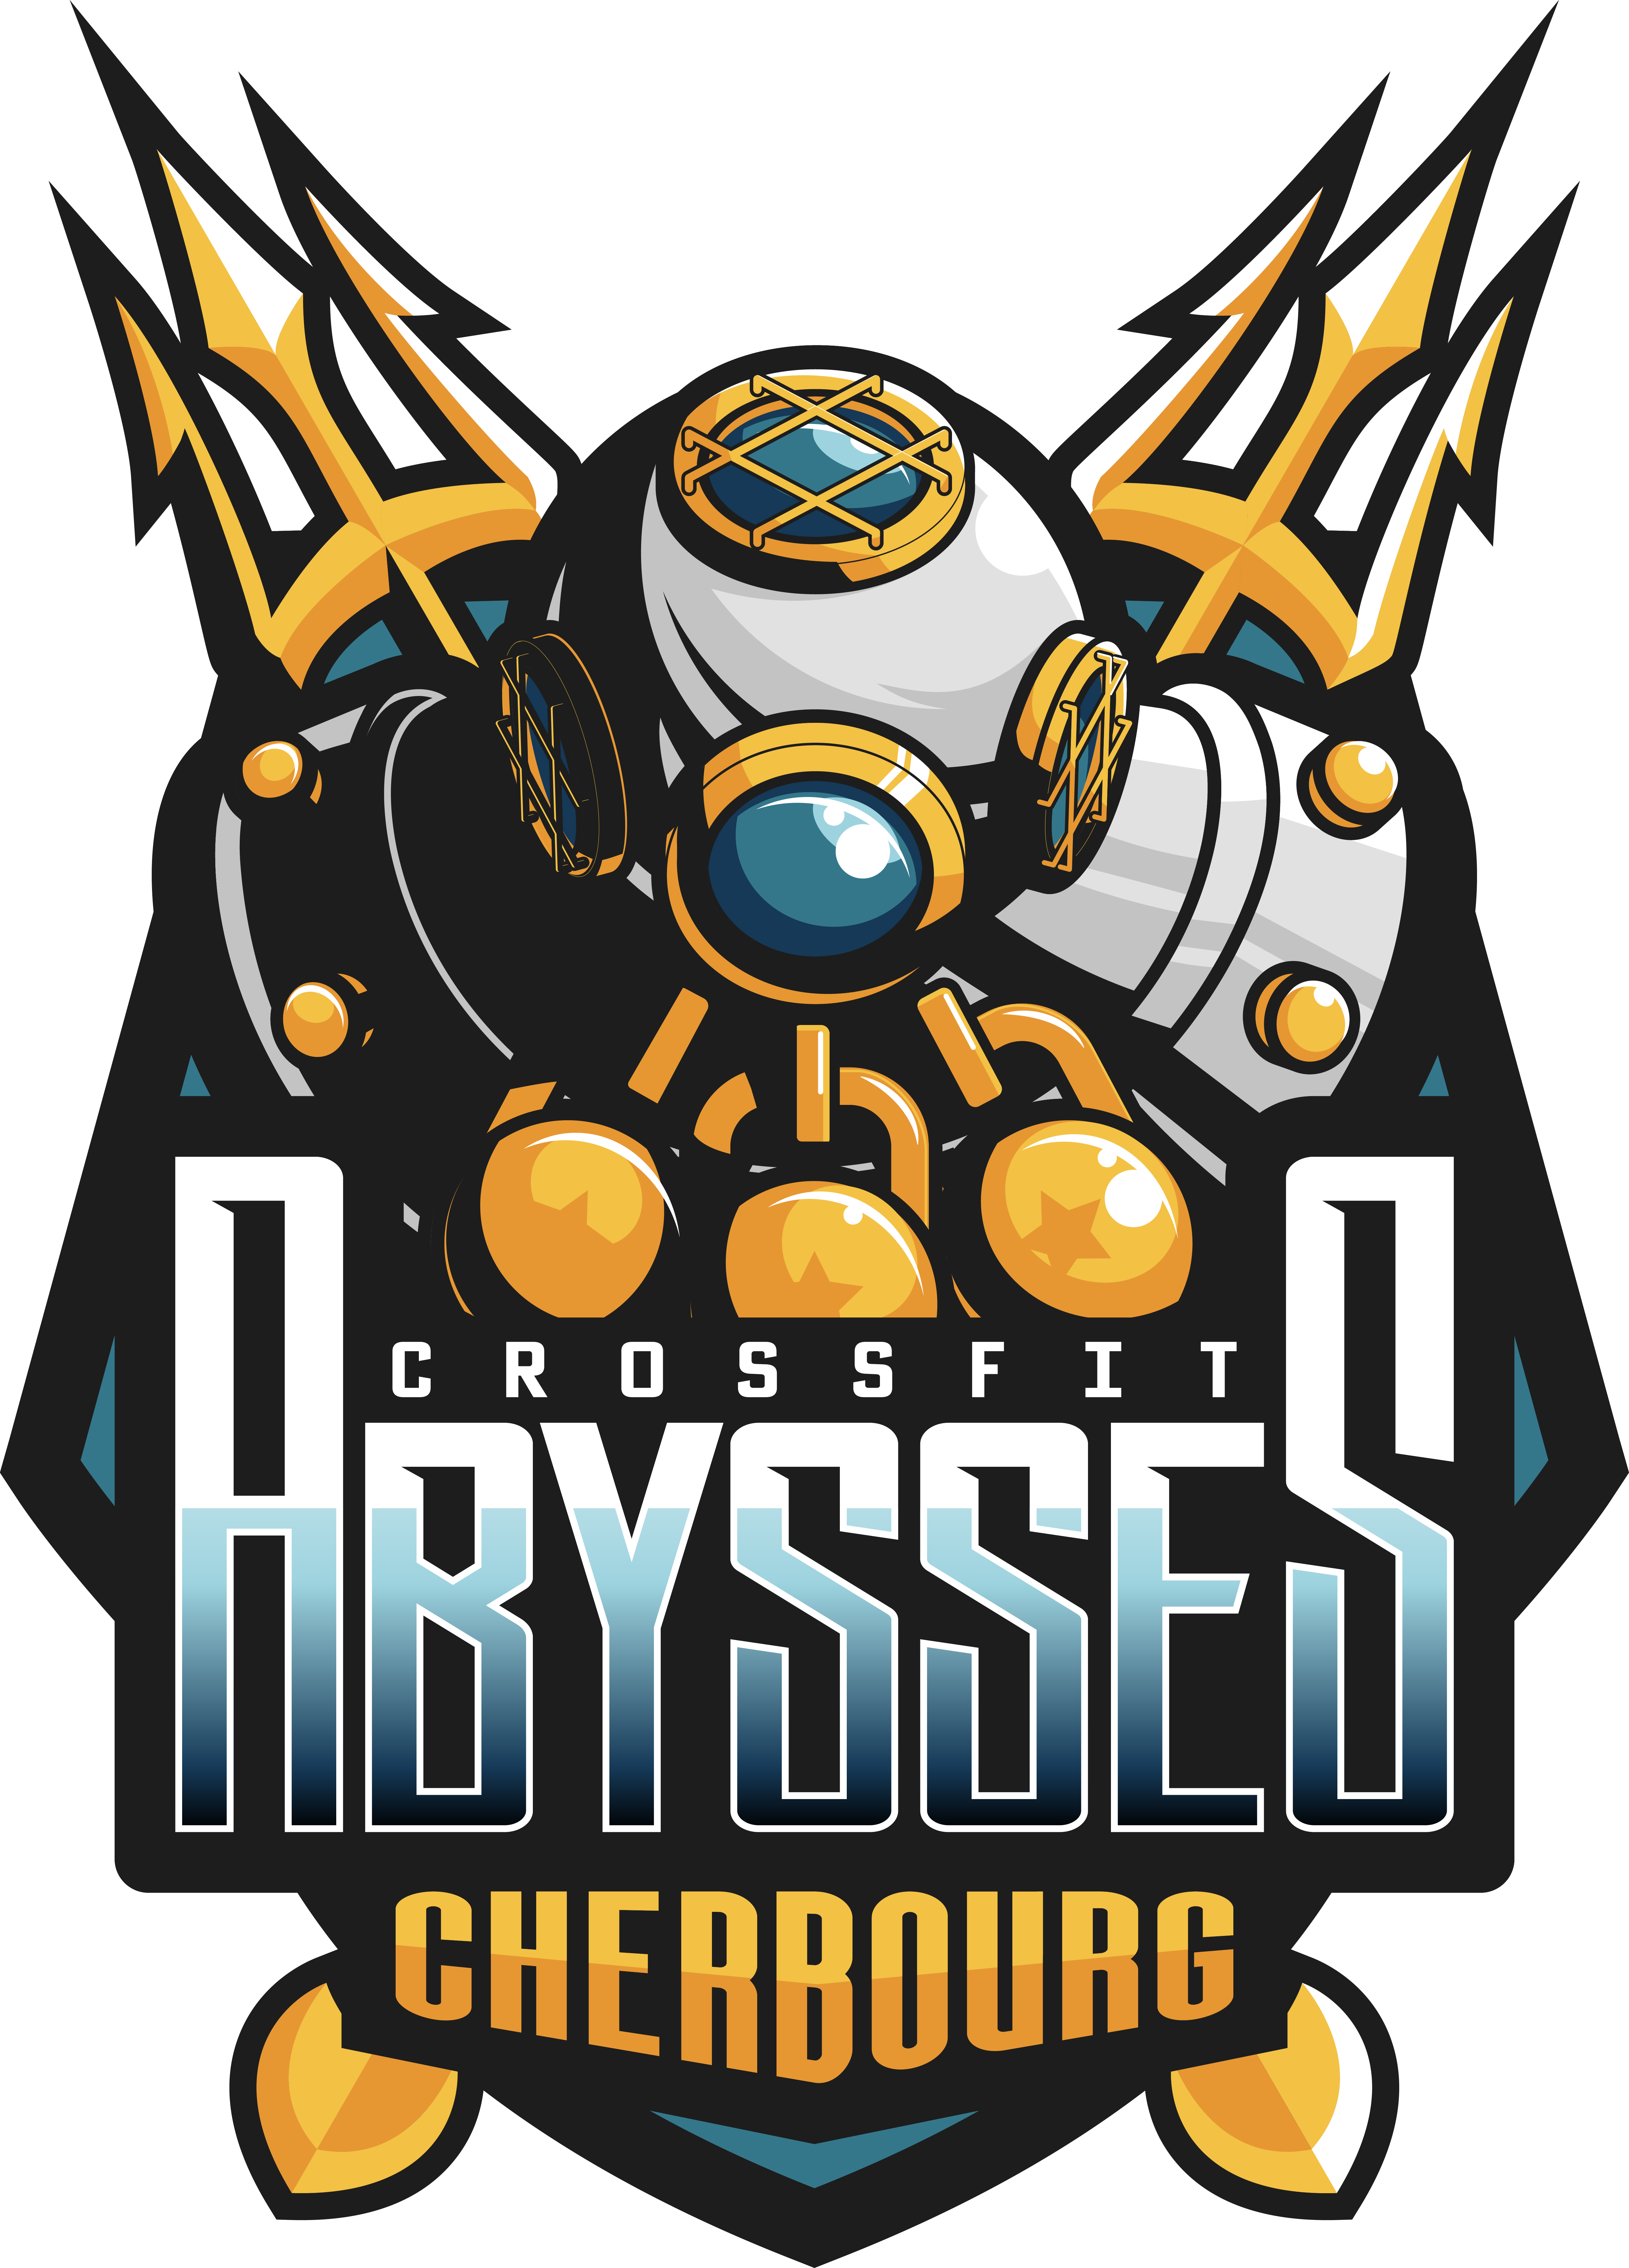 CrossFit Abysses Cherbourg logo